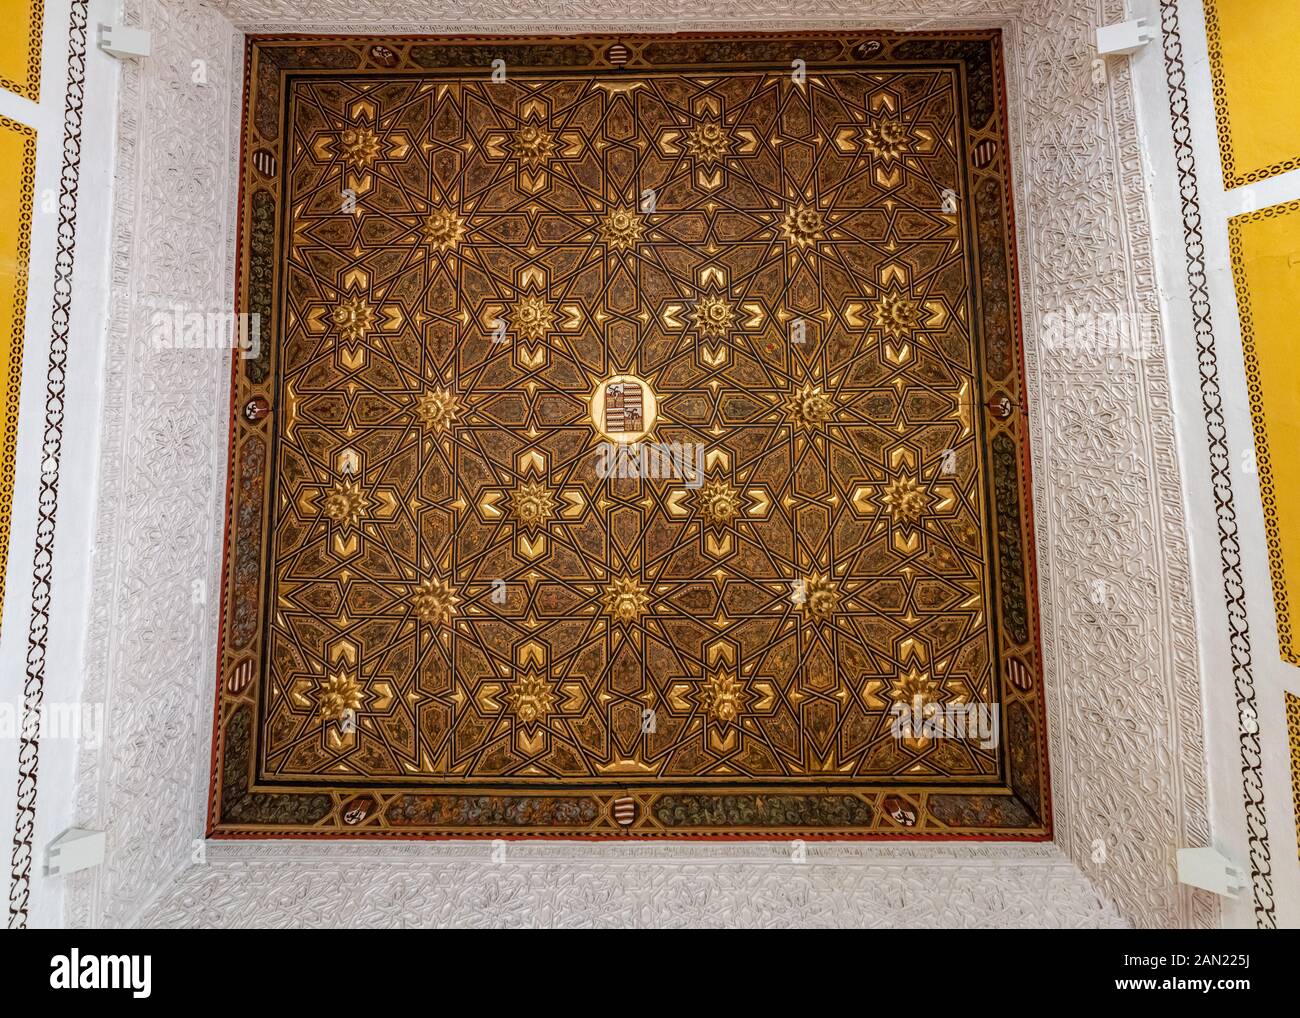 A staggered, ornamental coffered ceiling of Mudejar inspiration in a room in the Casa de Pilatos, Seville. Stock Photo